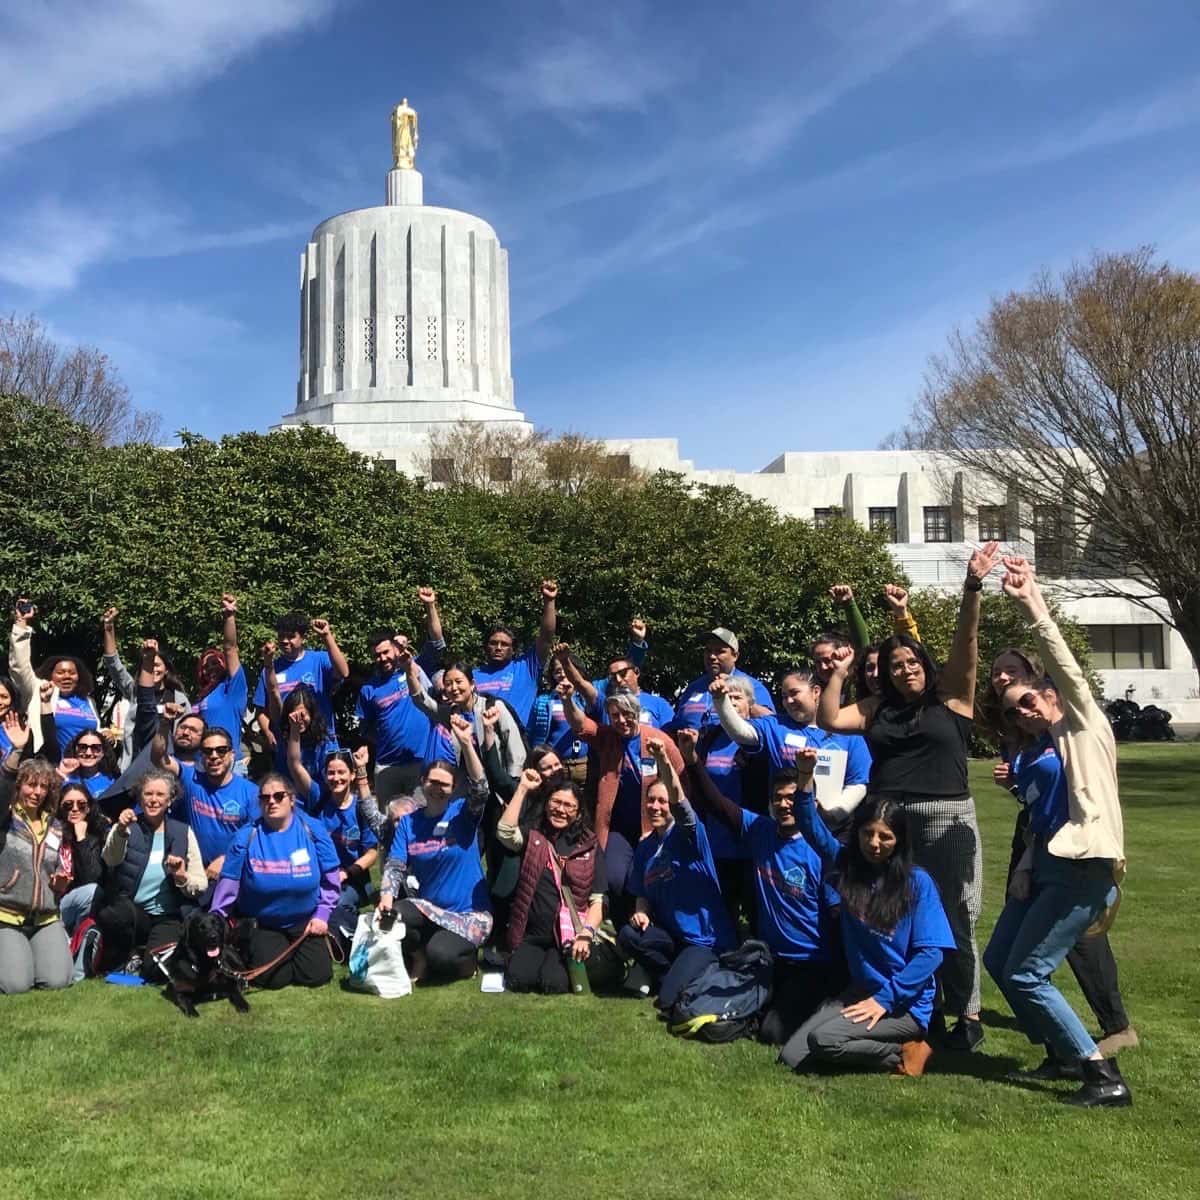 A large group of people in matching blue t-shirts pose on the lawn of a government building for a photo.